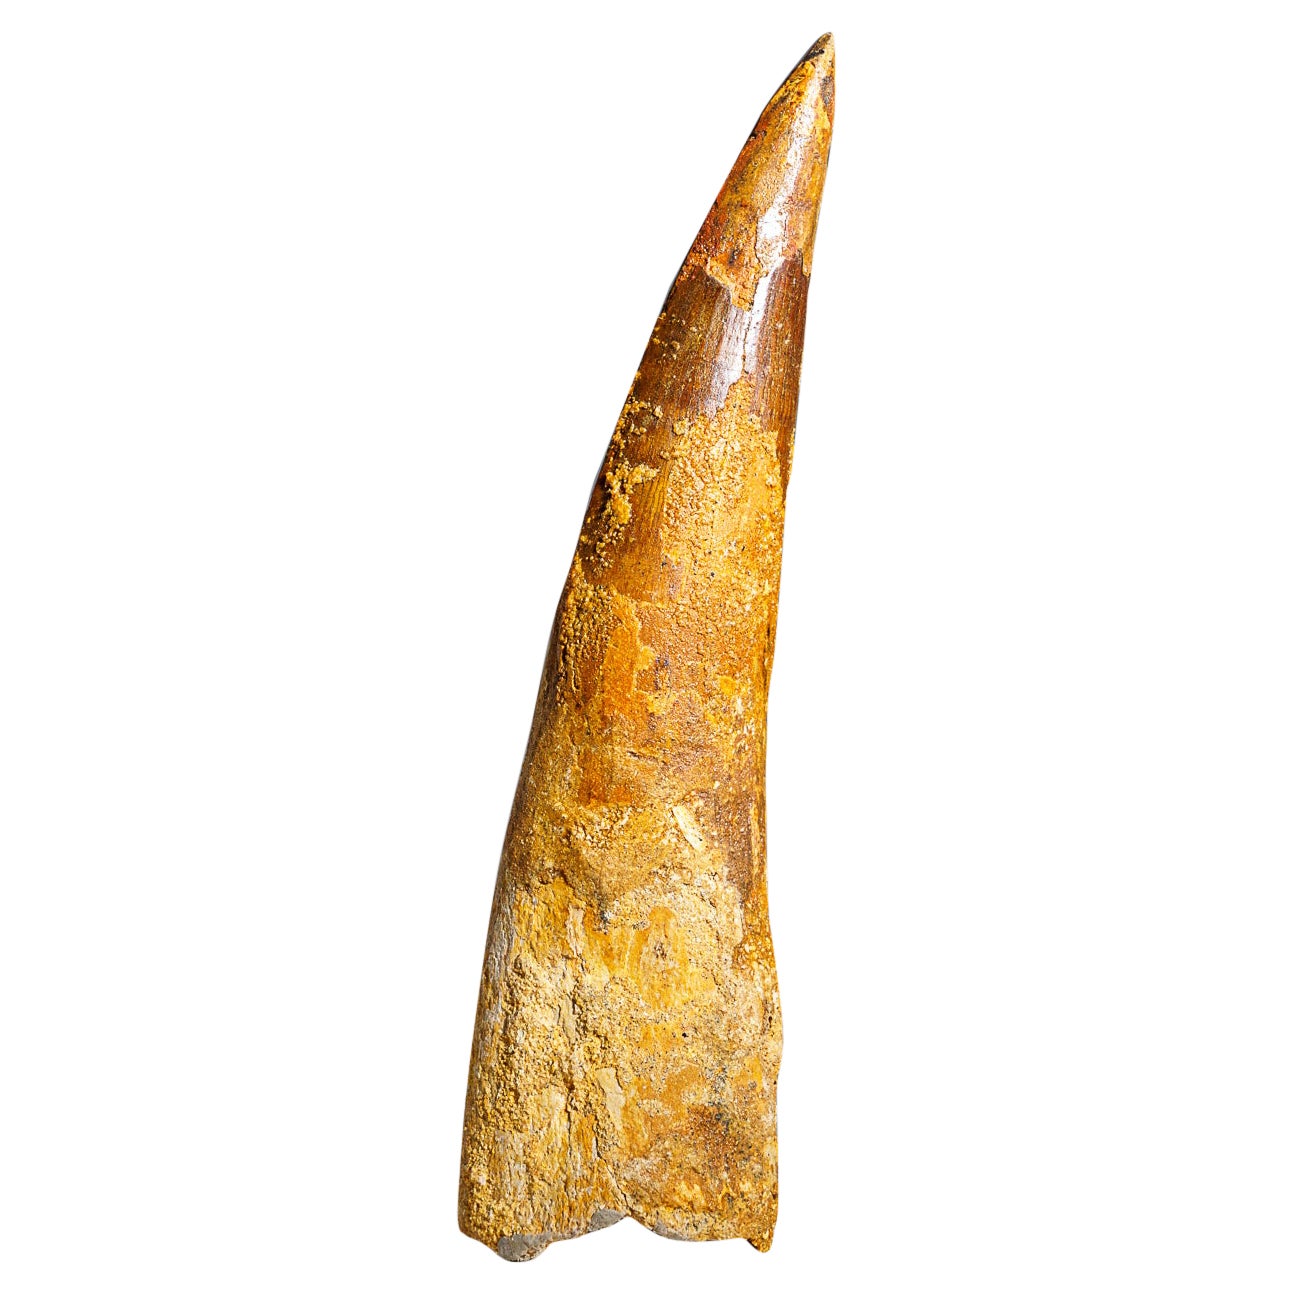 Genuine Natural Large Spinosaurus Dinosaur Tooth (90 grams) For Sale